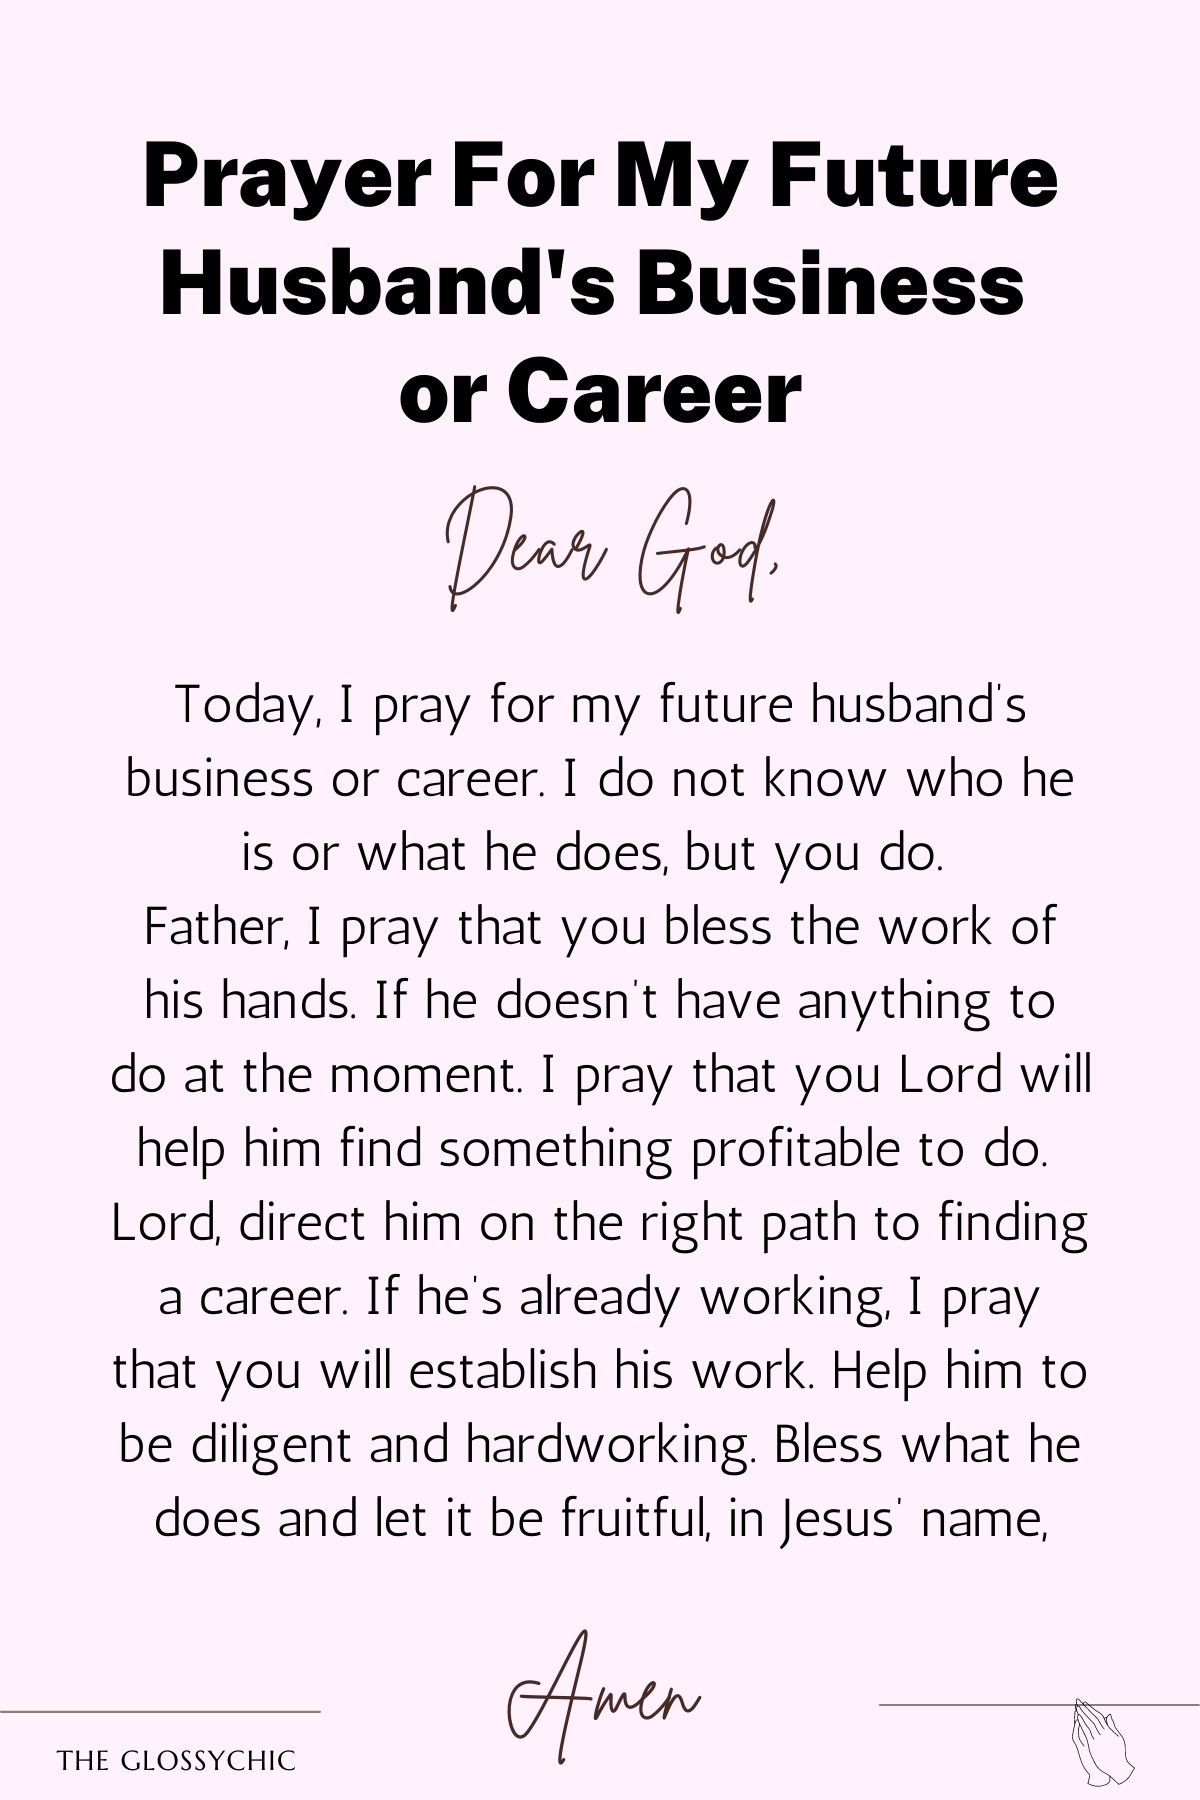 Prayer for my future husband's business and career